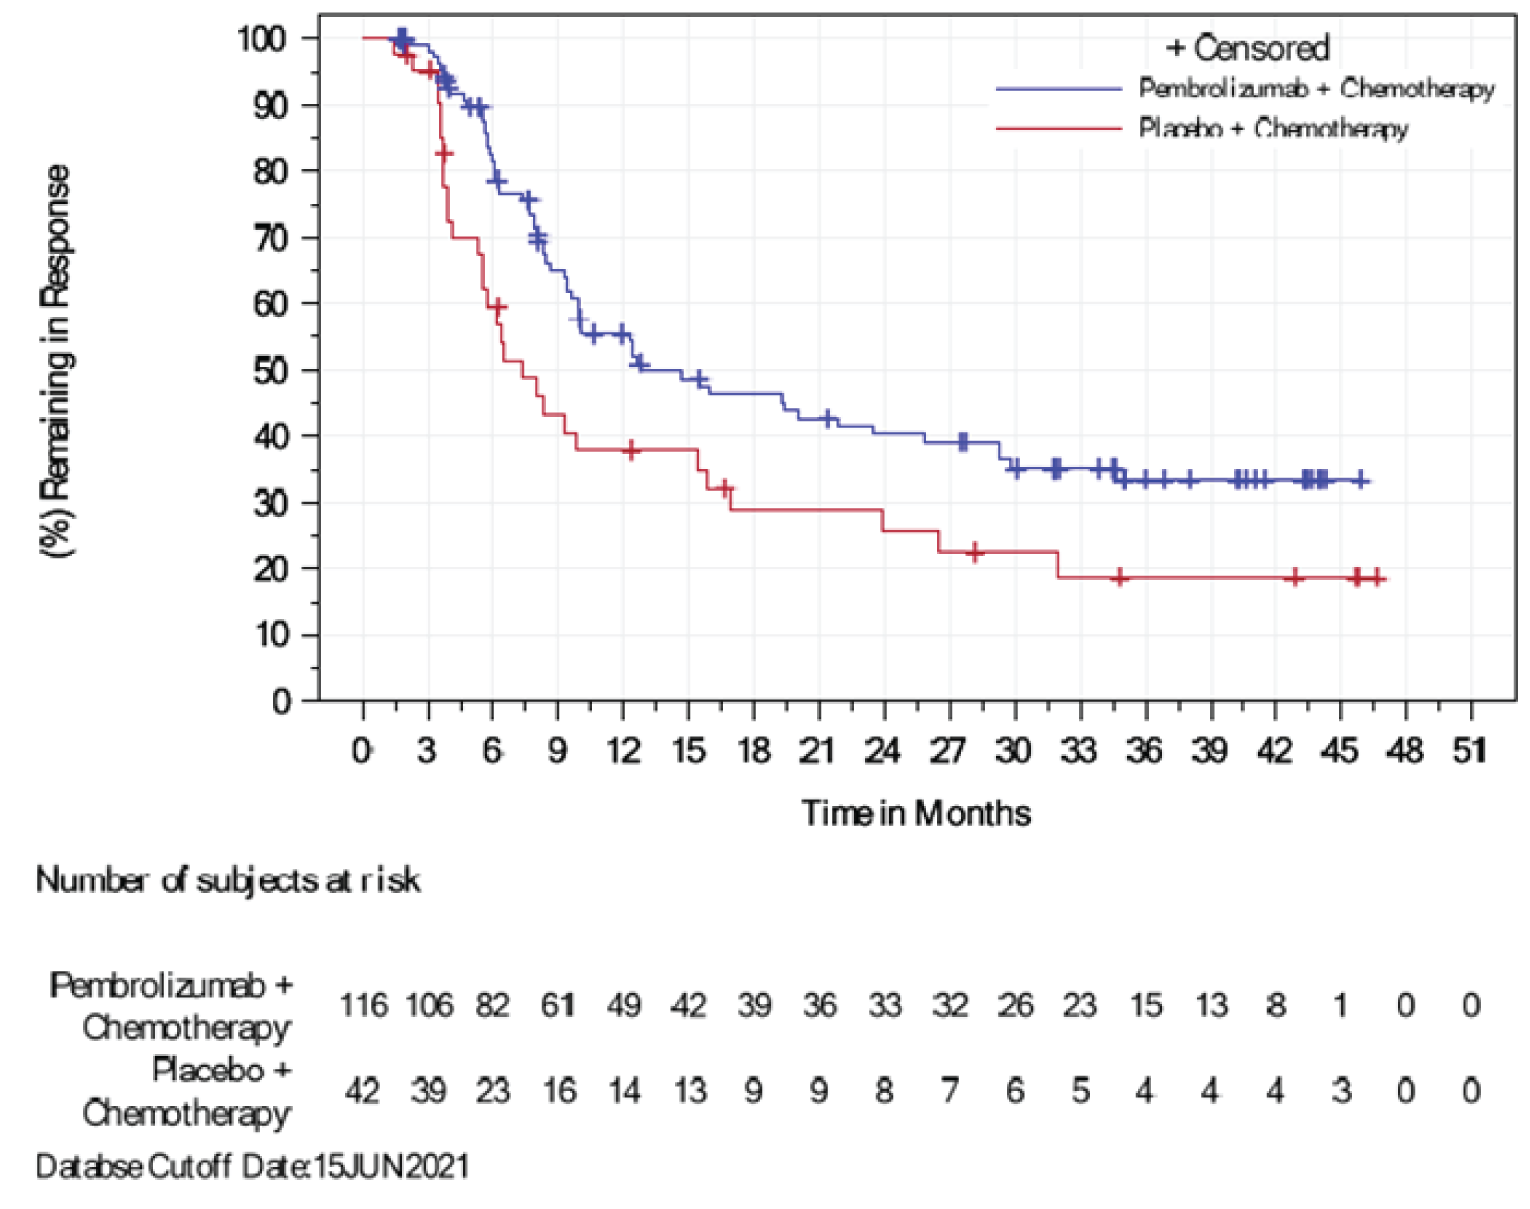 Kaplan-Meier estimates of PFS at final analysis in the ITT population and subset of patients with PD-L1–positive tumours (CPS ≥ 10). The total numbers of at-risk patients in the pembrolizumab plus chemotherapy group at 0, 3, 6, 9, 12, 15, 18, 21, 24, 27, 30, 33, 36, 39, 42, 45, 48, 51, and 54 months were 220, 173, 122, 95, 63, 52, 44, 42, 38, 36, 34, 32, 27, 19, 13, 6, 0, 0, and 0, respectively.